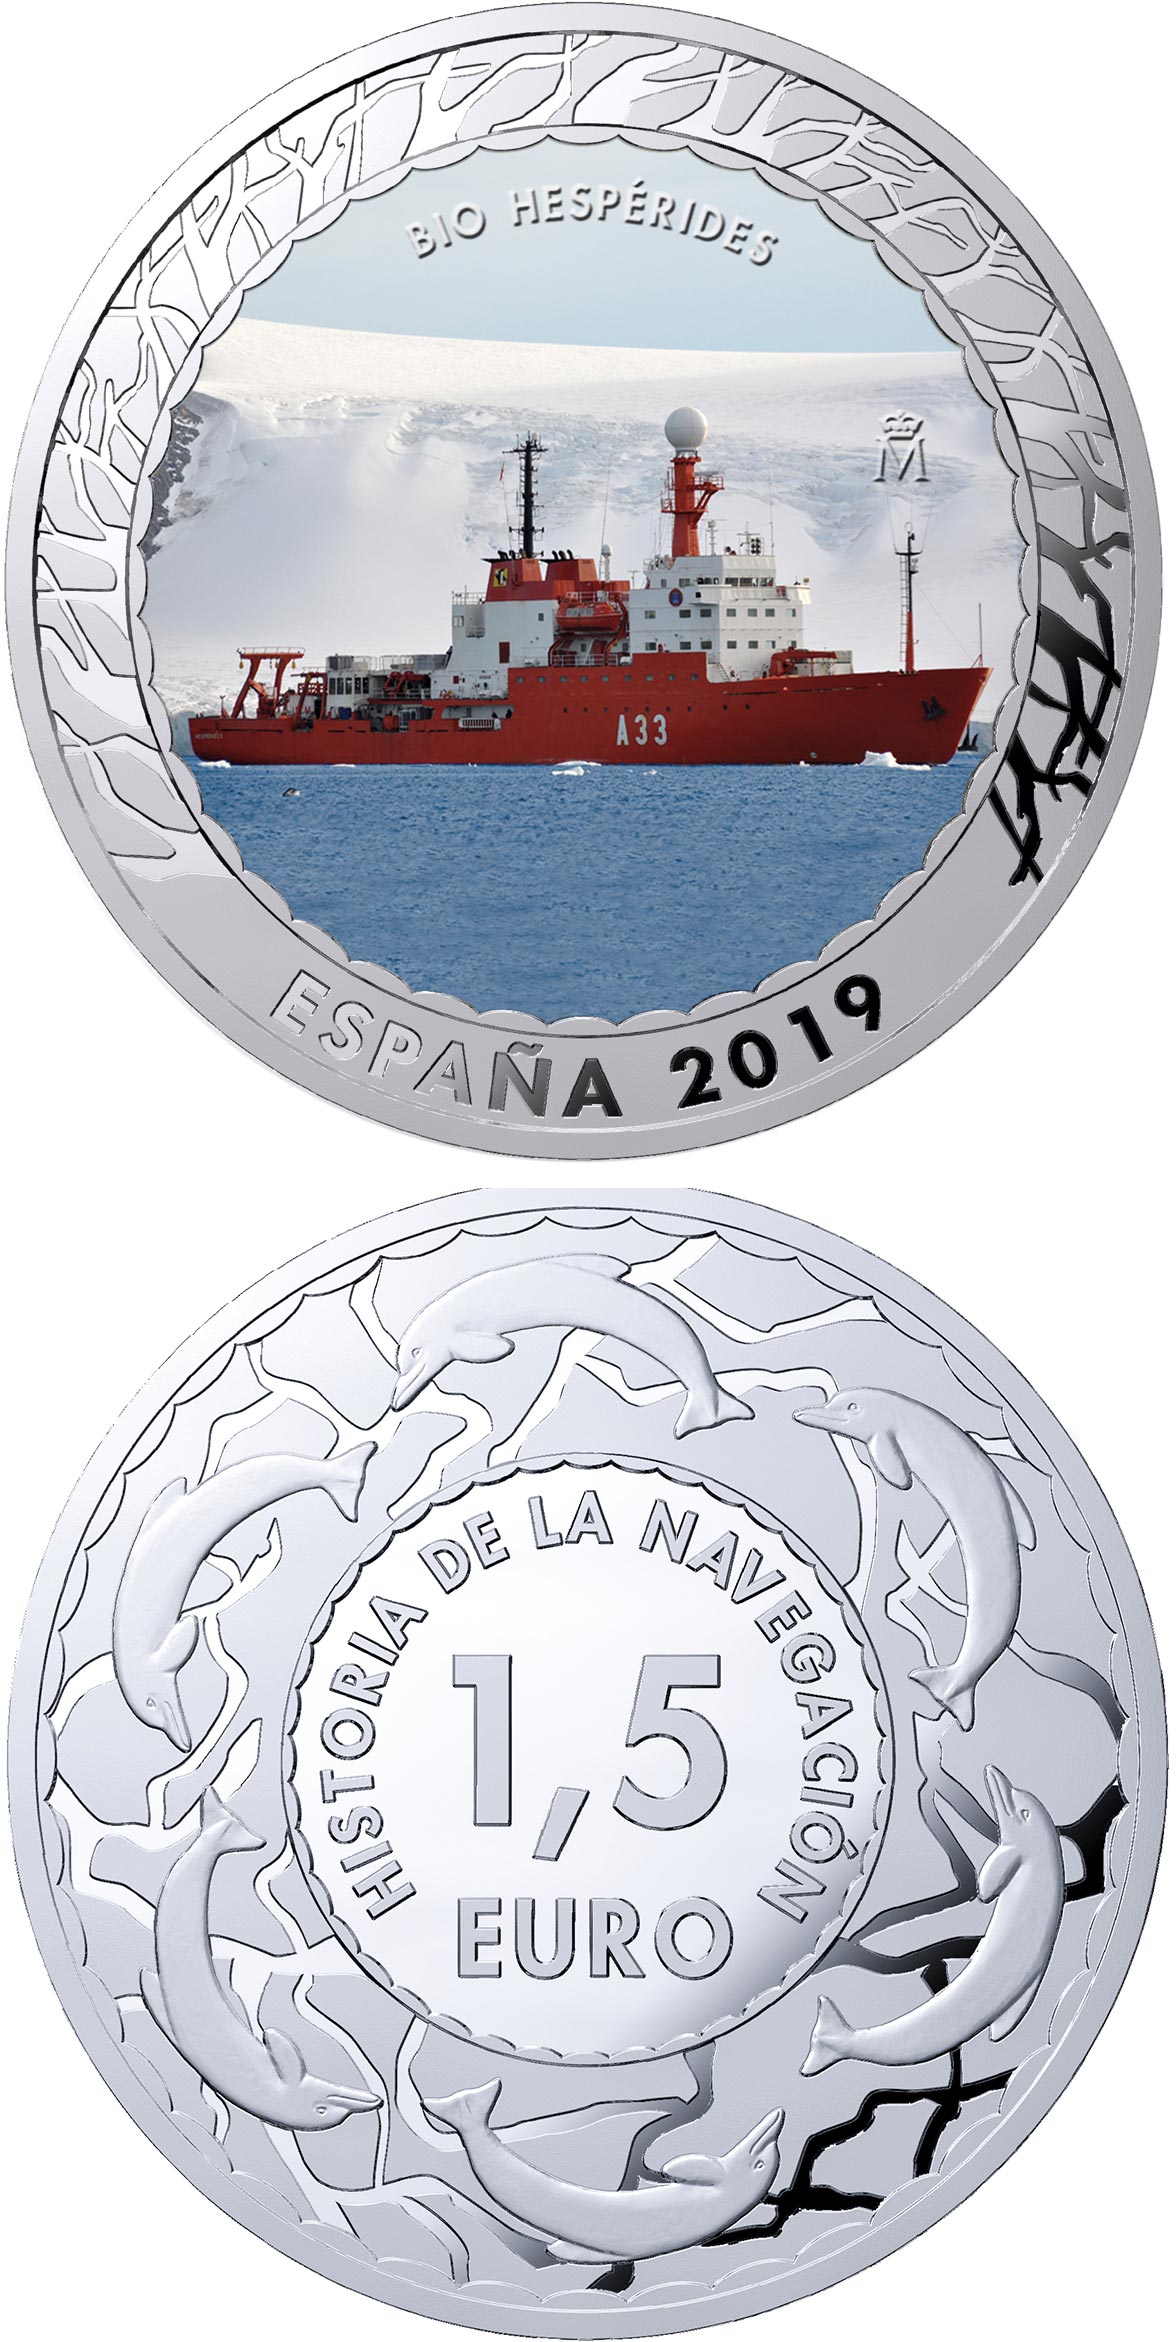 Image of 1.5 euro coin - Bio Hespérides | Spain 2019.  The Copper–Nickel (CuNi) coin is of BU quality.